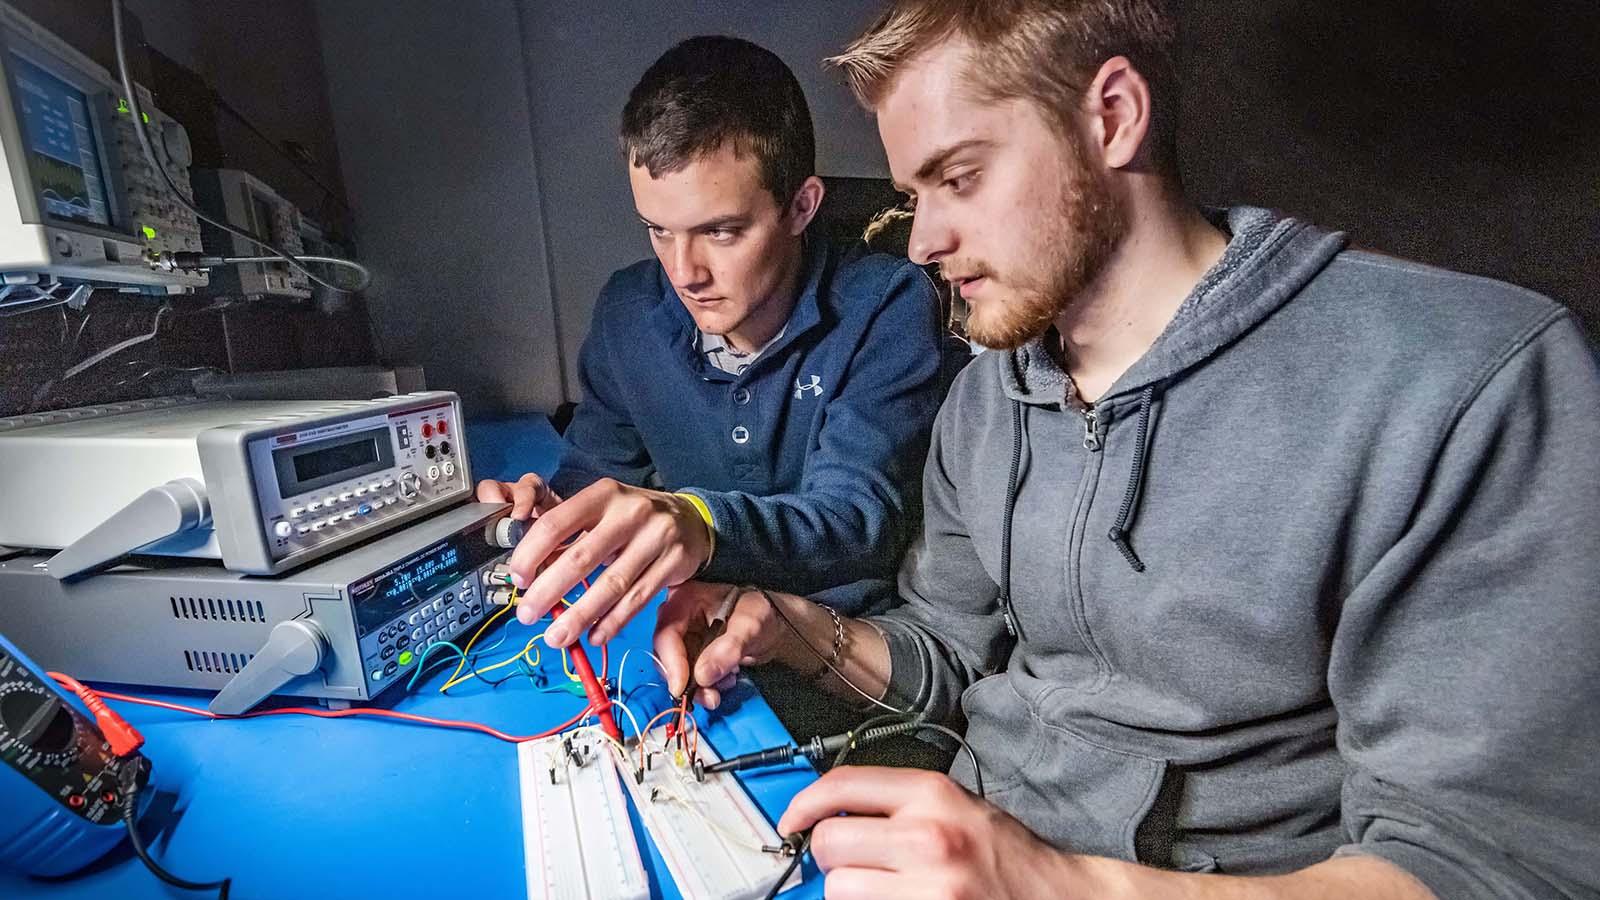 Two electrical engineering students working on project